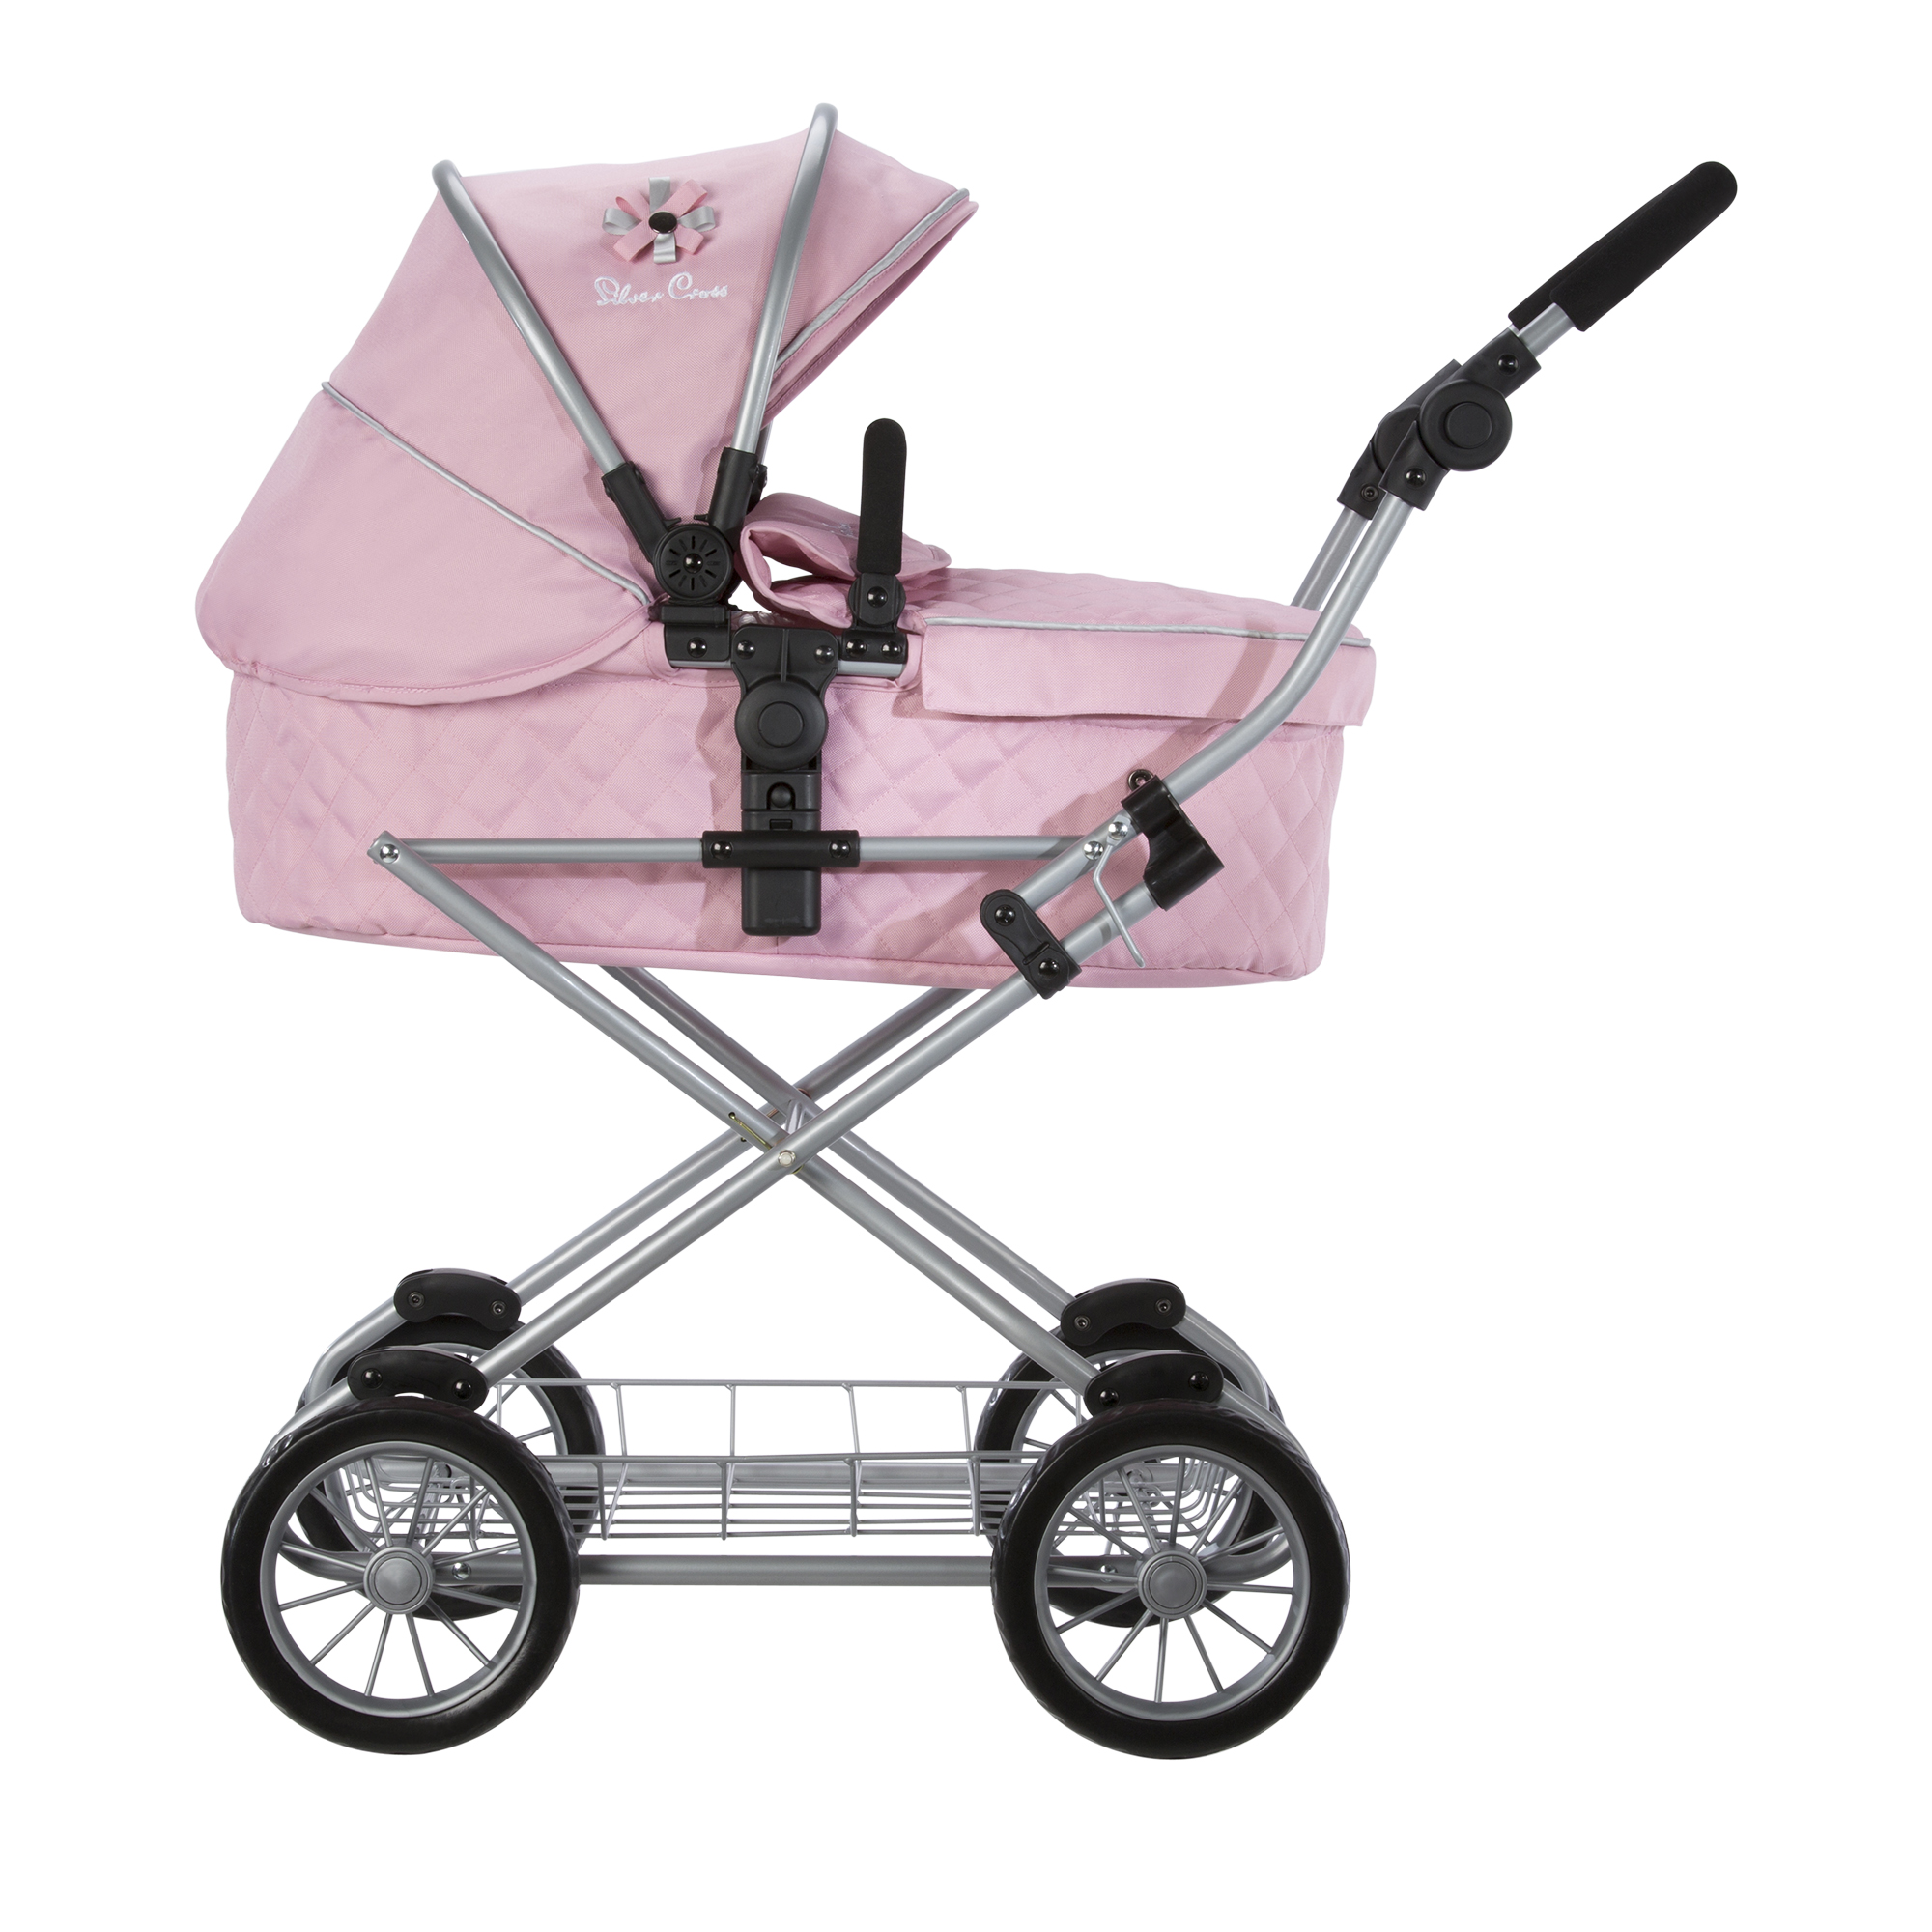 toy pram for 8 year old